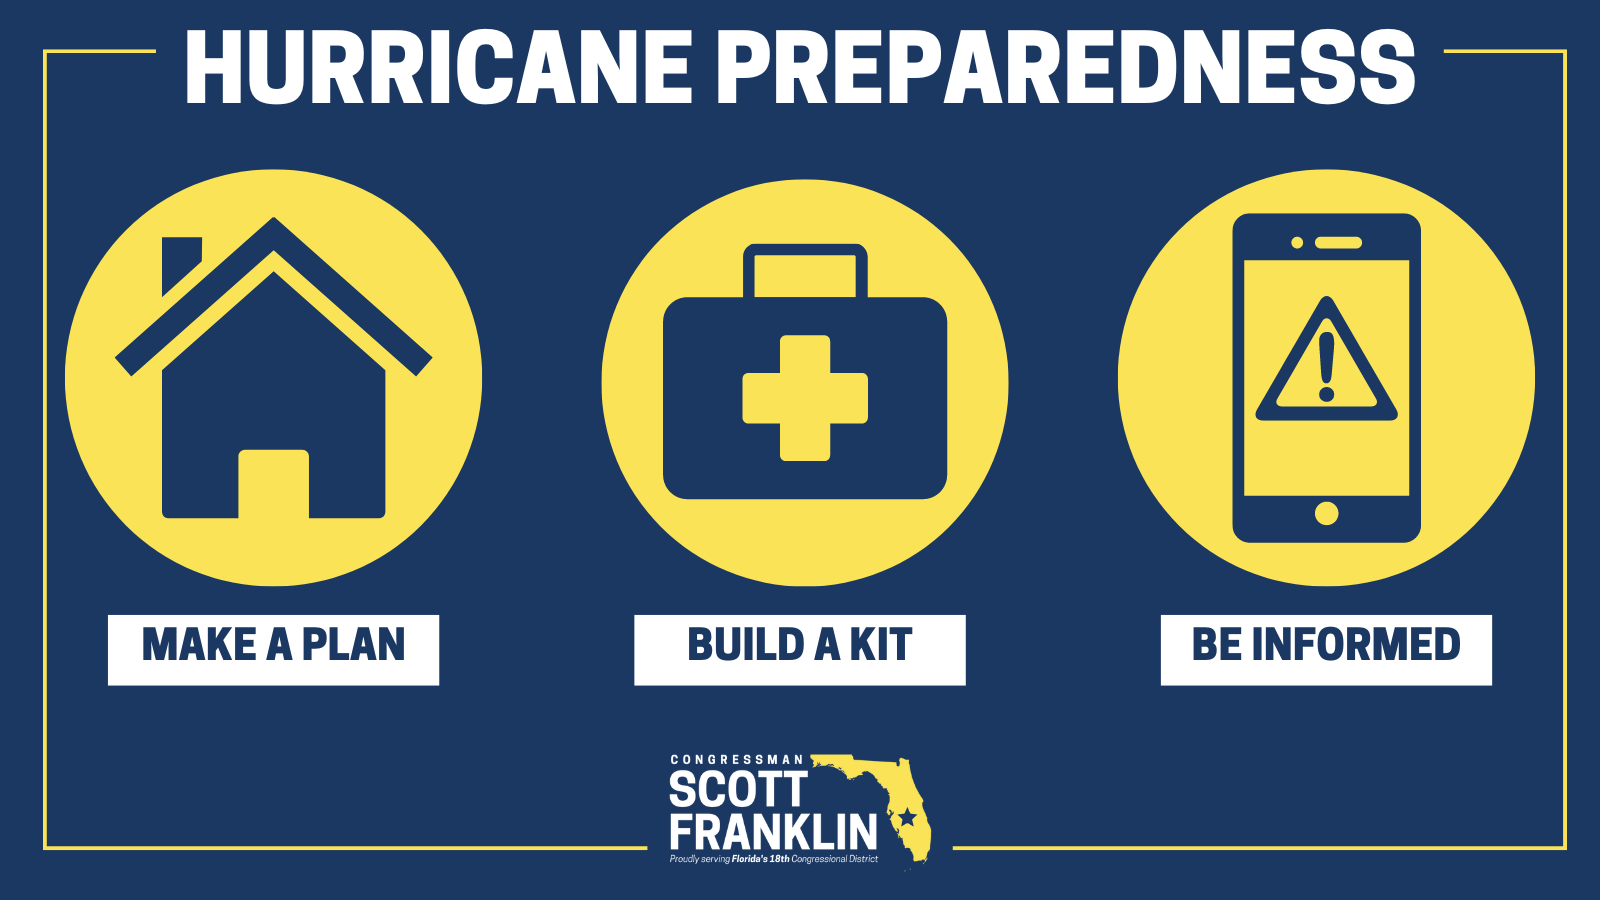 Storm prep: Here's what to have on your hurricane supplies grocery list